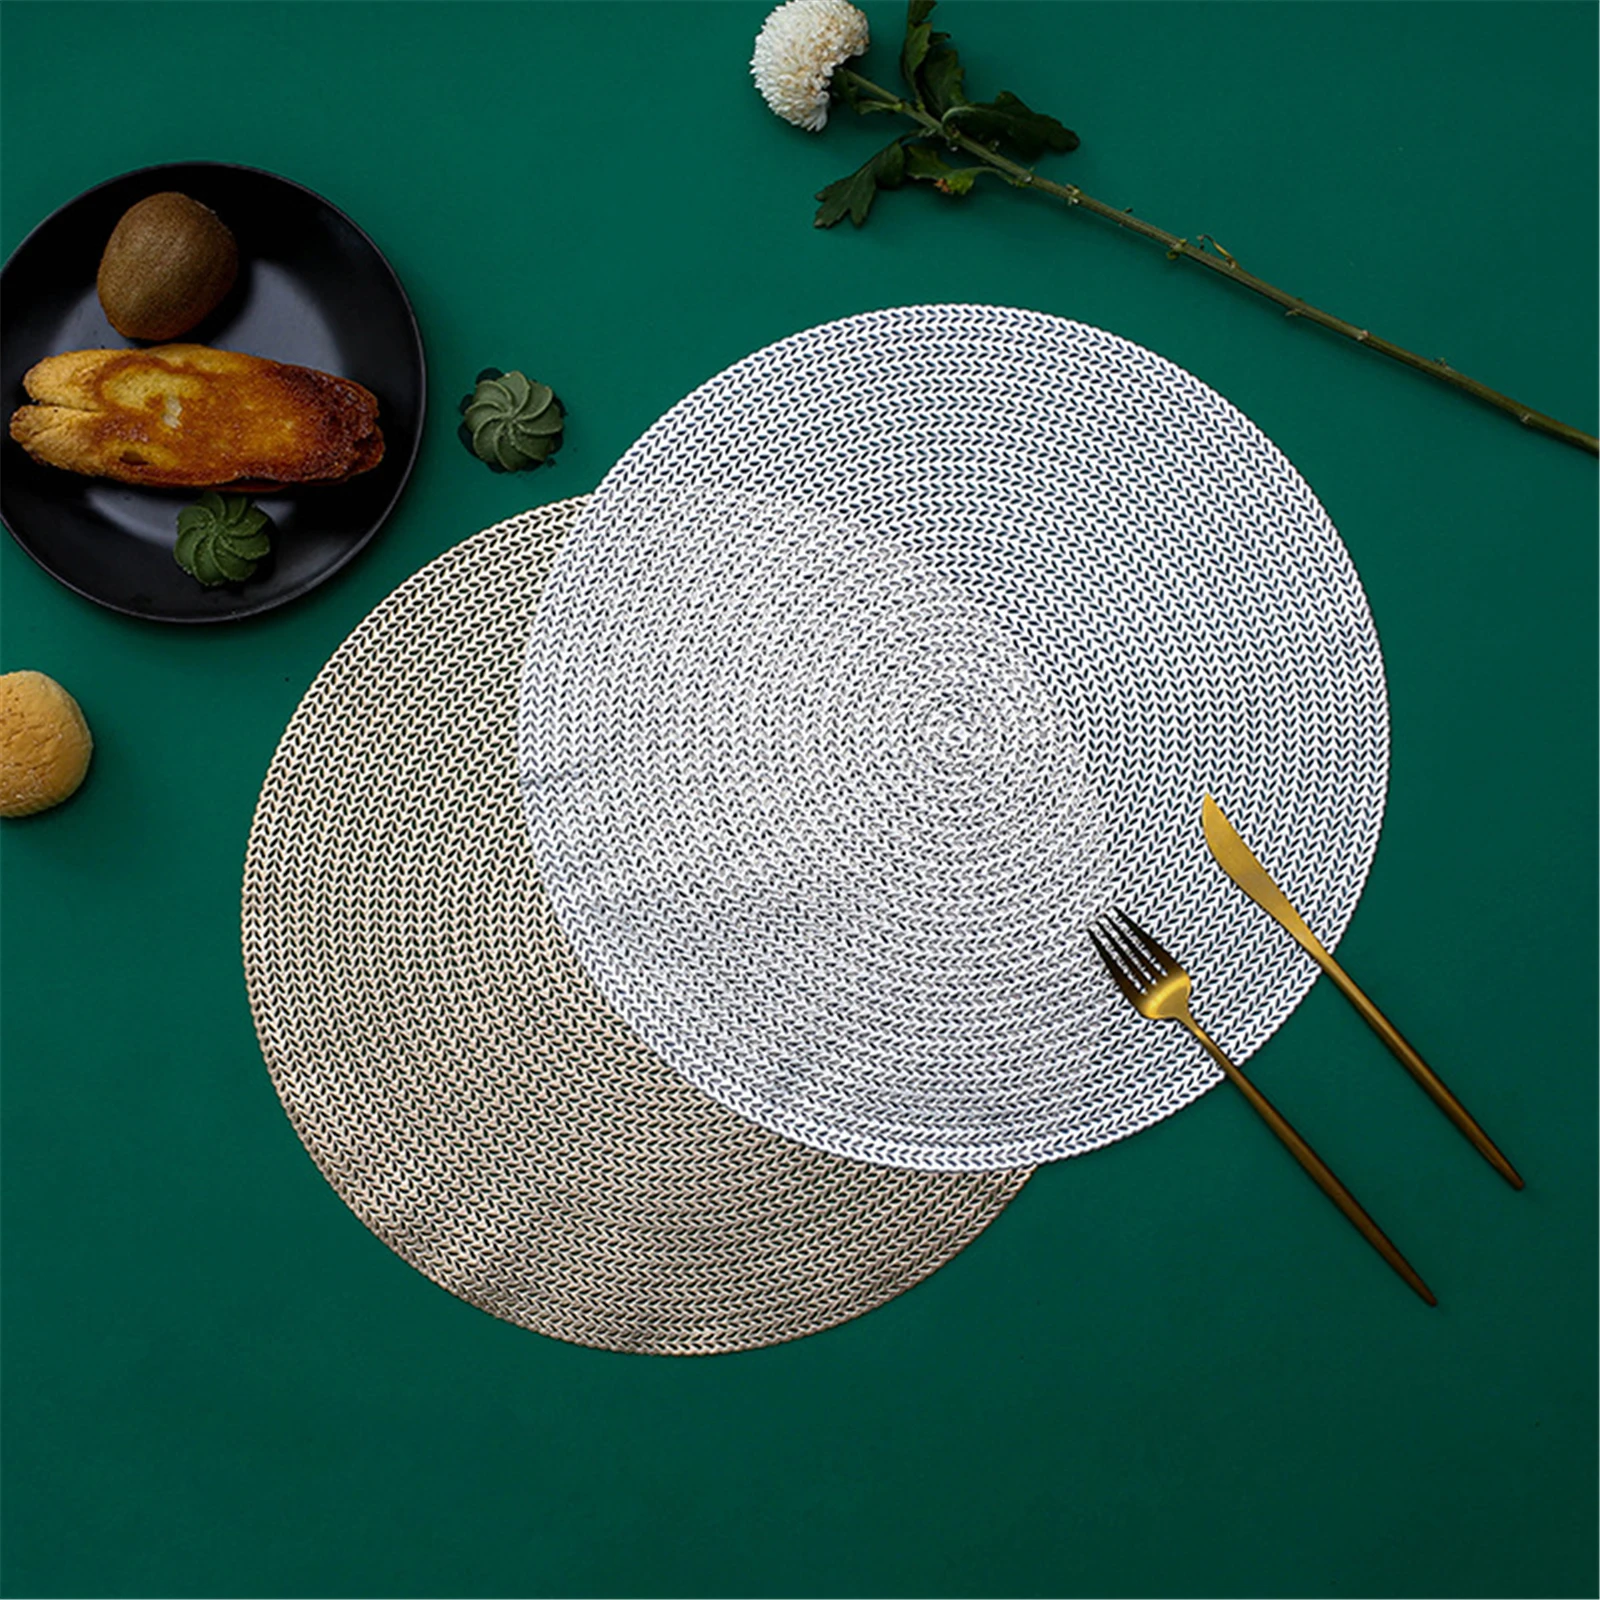 Fuwatacchi Placemats Cutout Hangable Mats Octagonal Hollow Non Slip Dining Table Pads Coaster Home Decor Gold Tableware Napkins